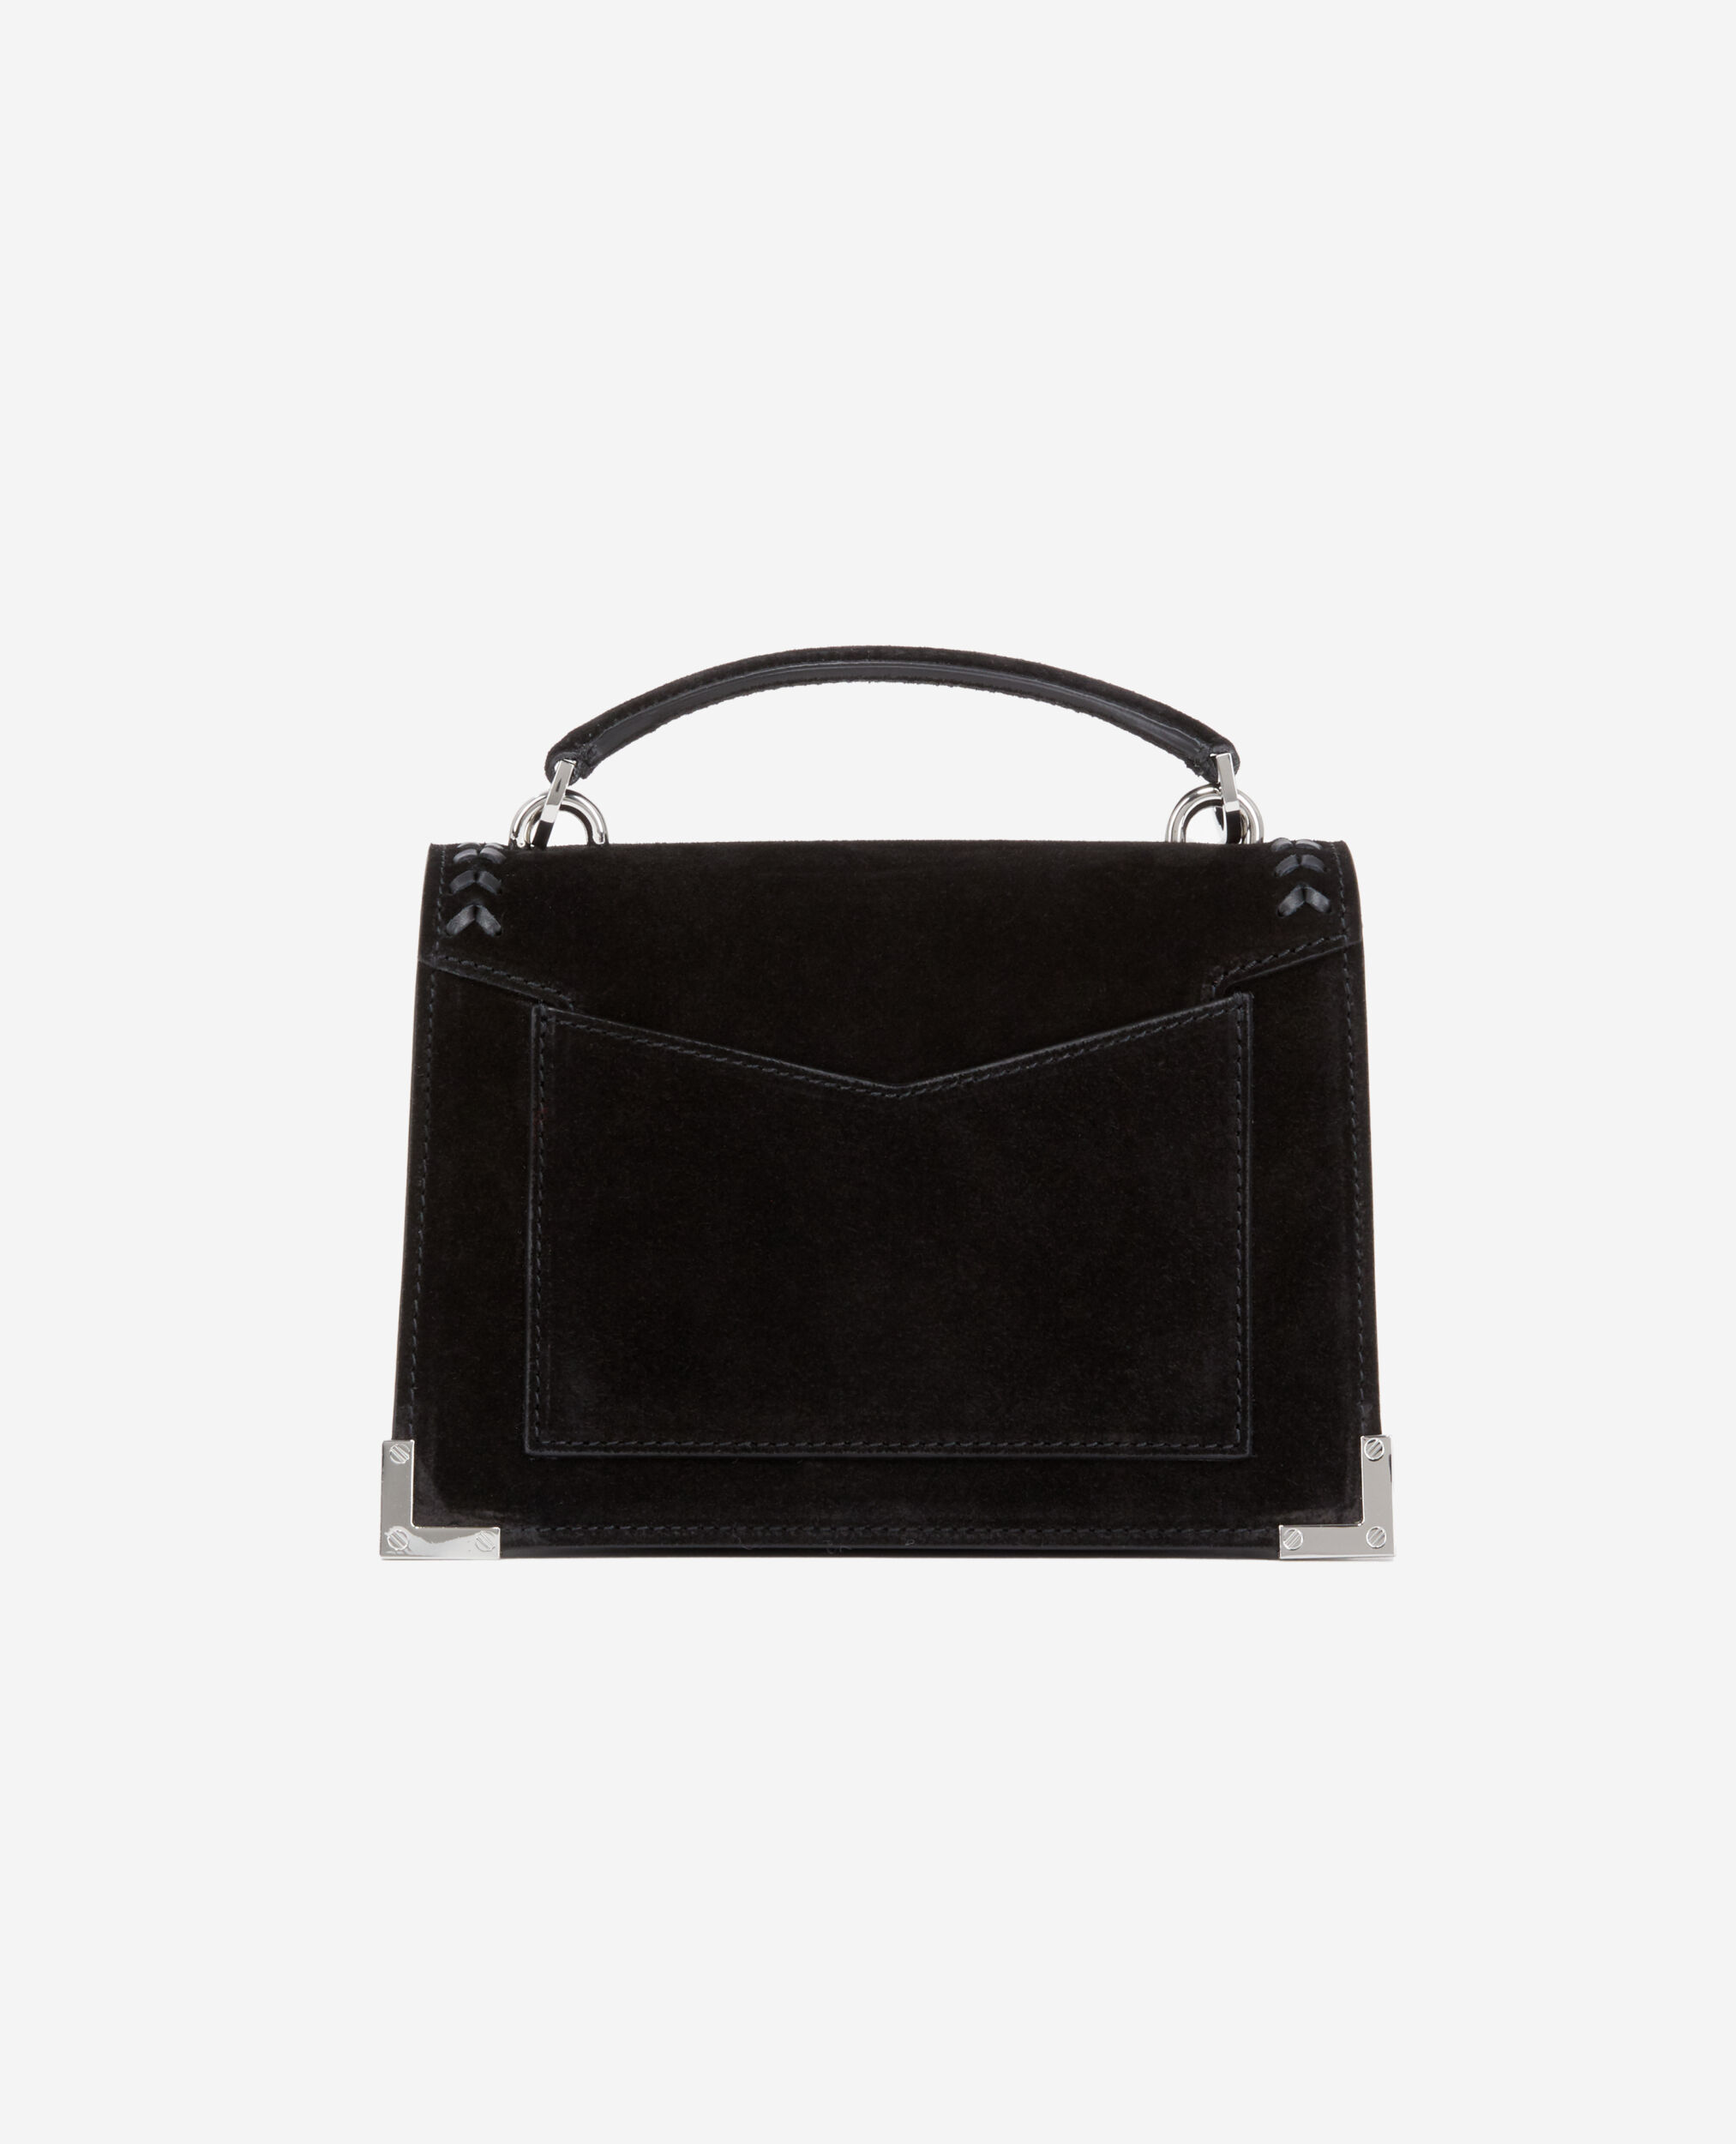 Small Emily bag in black suede leather, BLACK, hi-res image number null